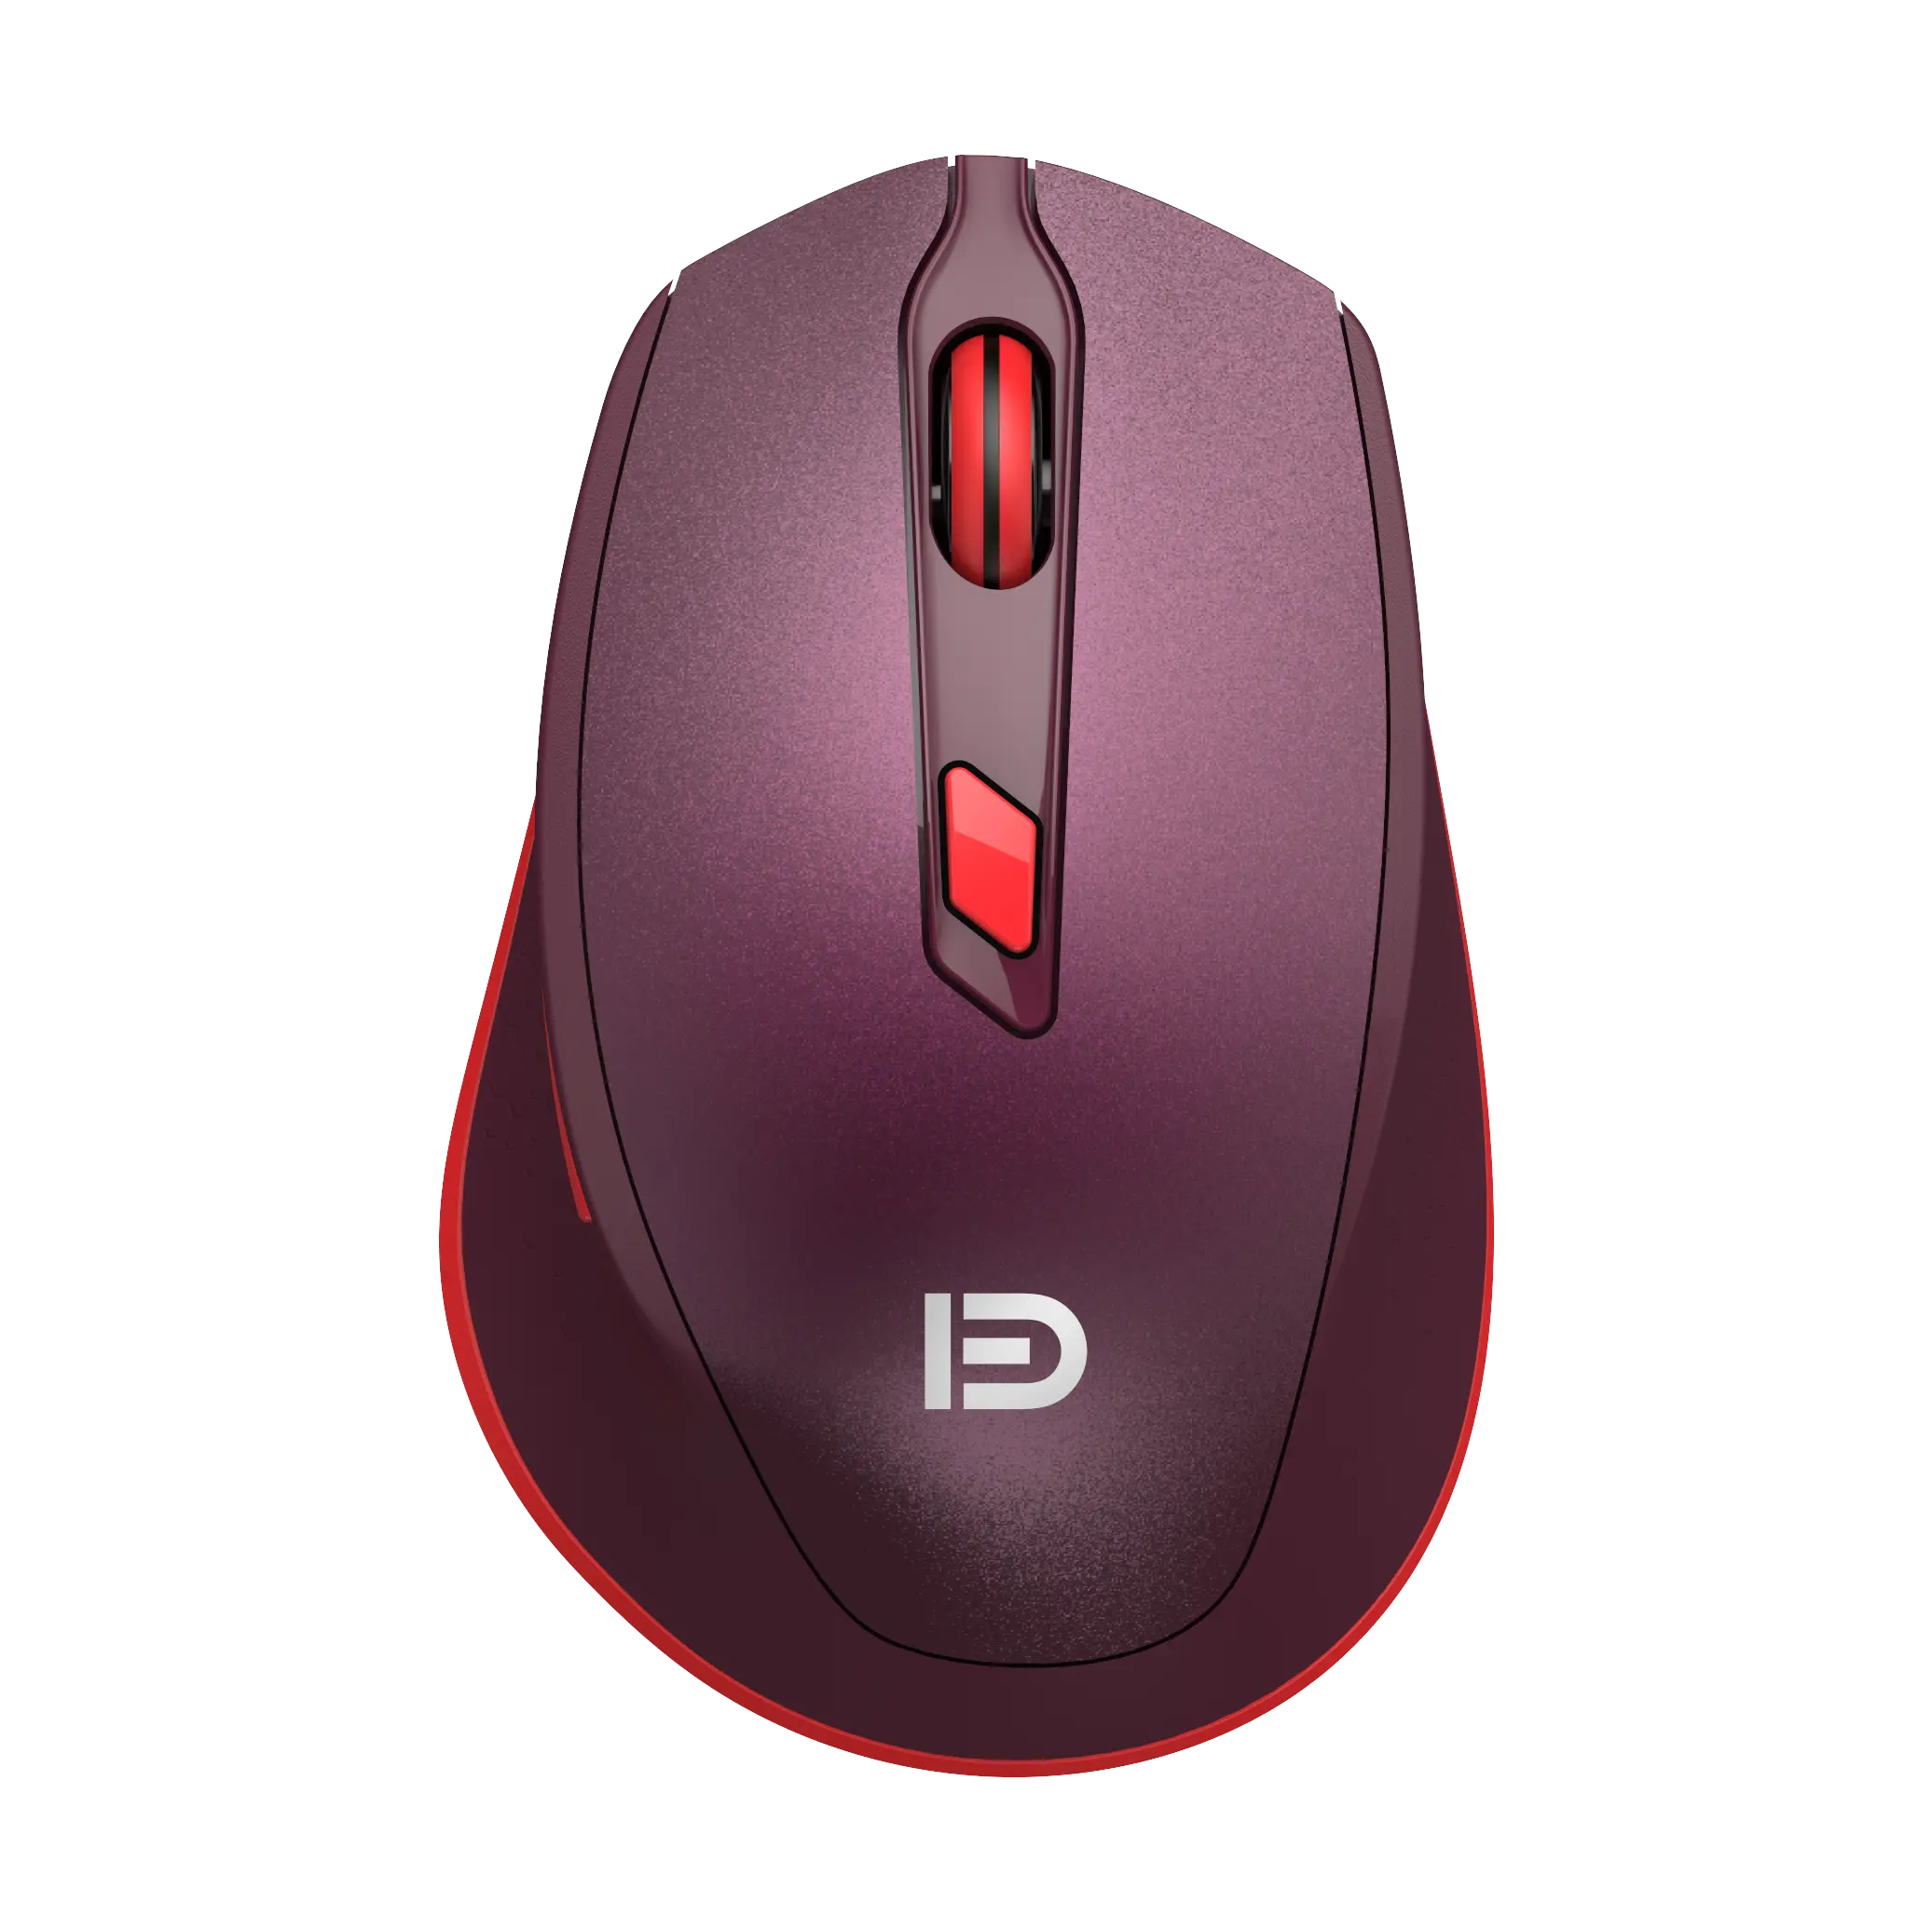 FD OEM i365 Blue Usb 2.4ghz Wireless Optical Mouse with 1 Wireless Optical Function